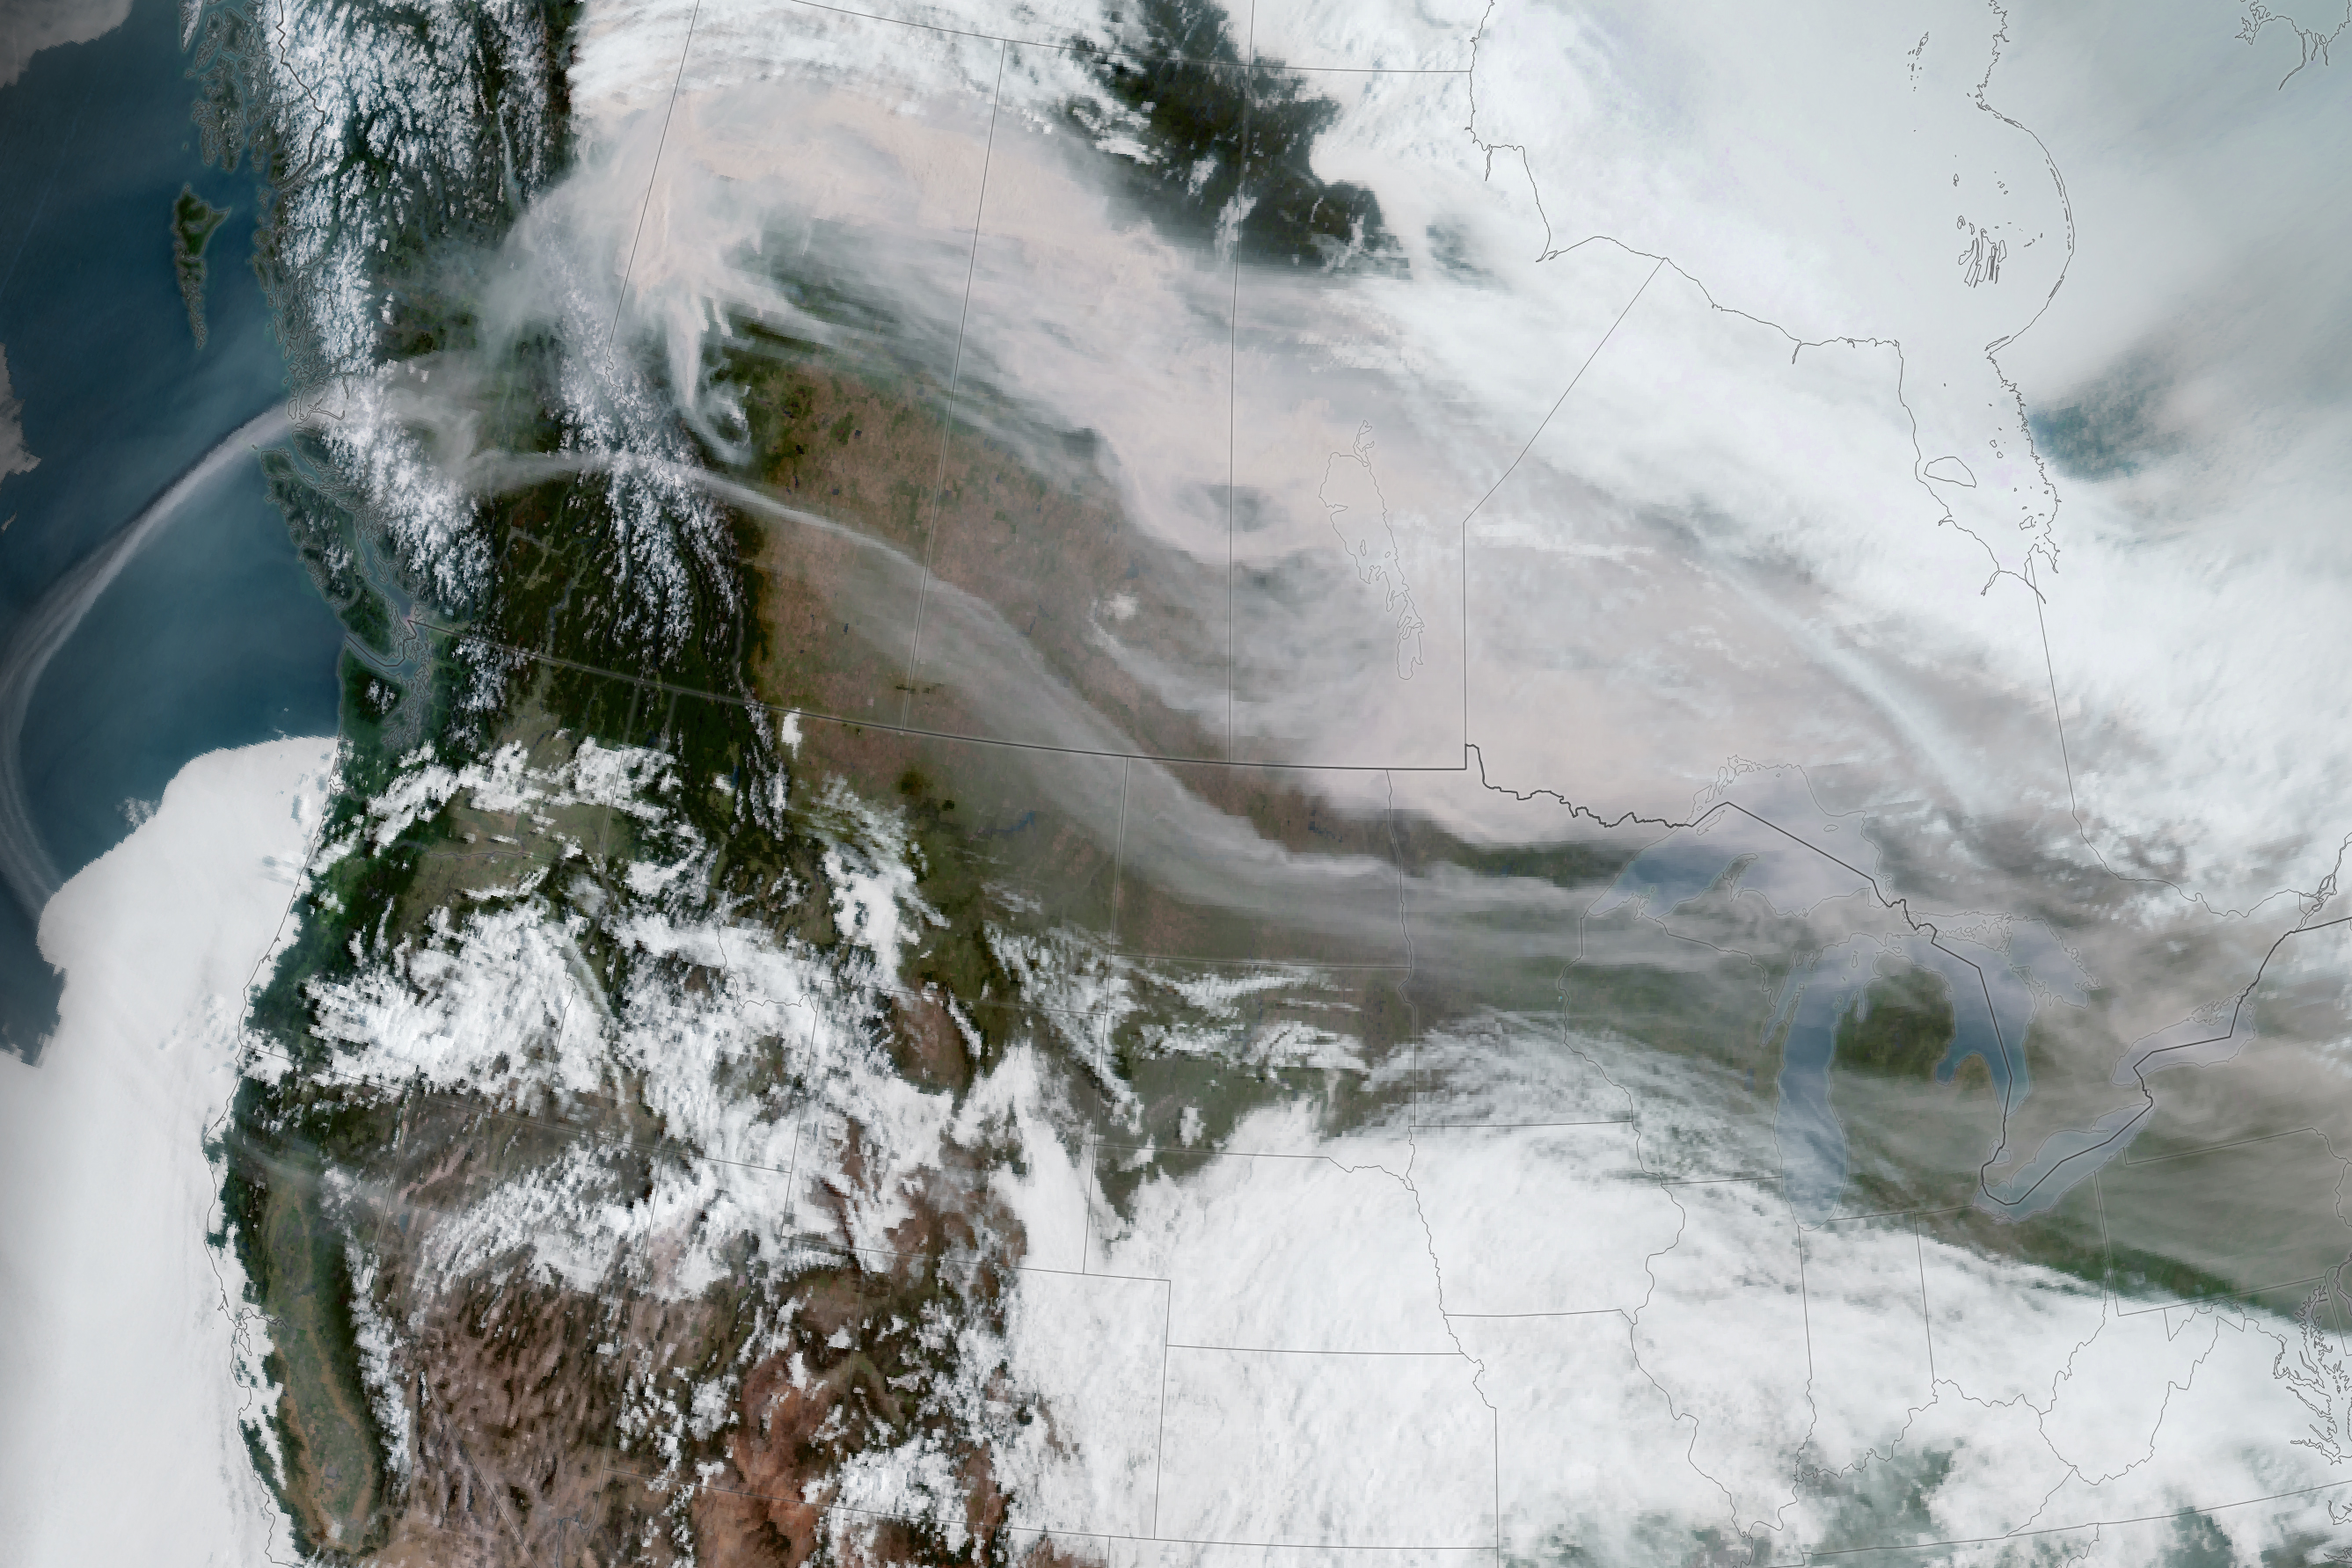 The smoke clouds generated by the wildfires ongoing in Canada